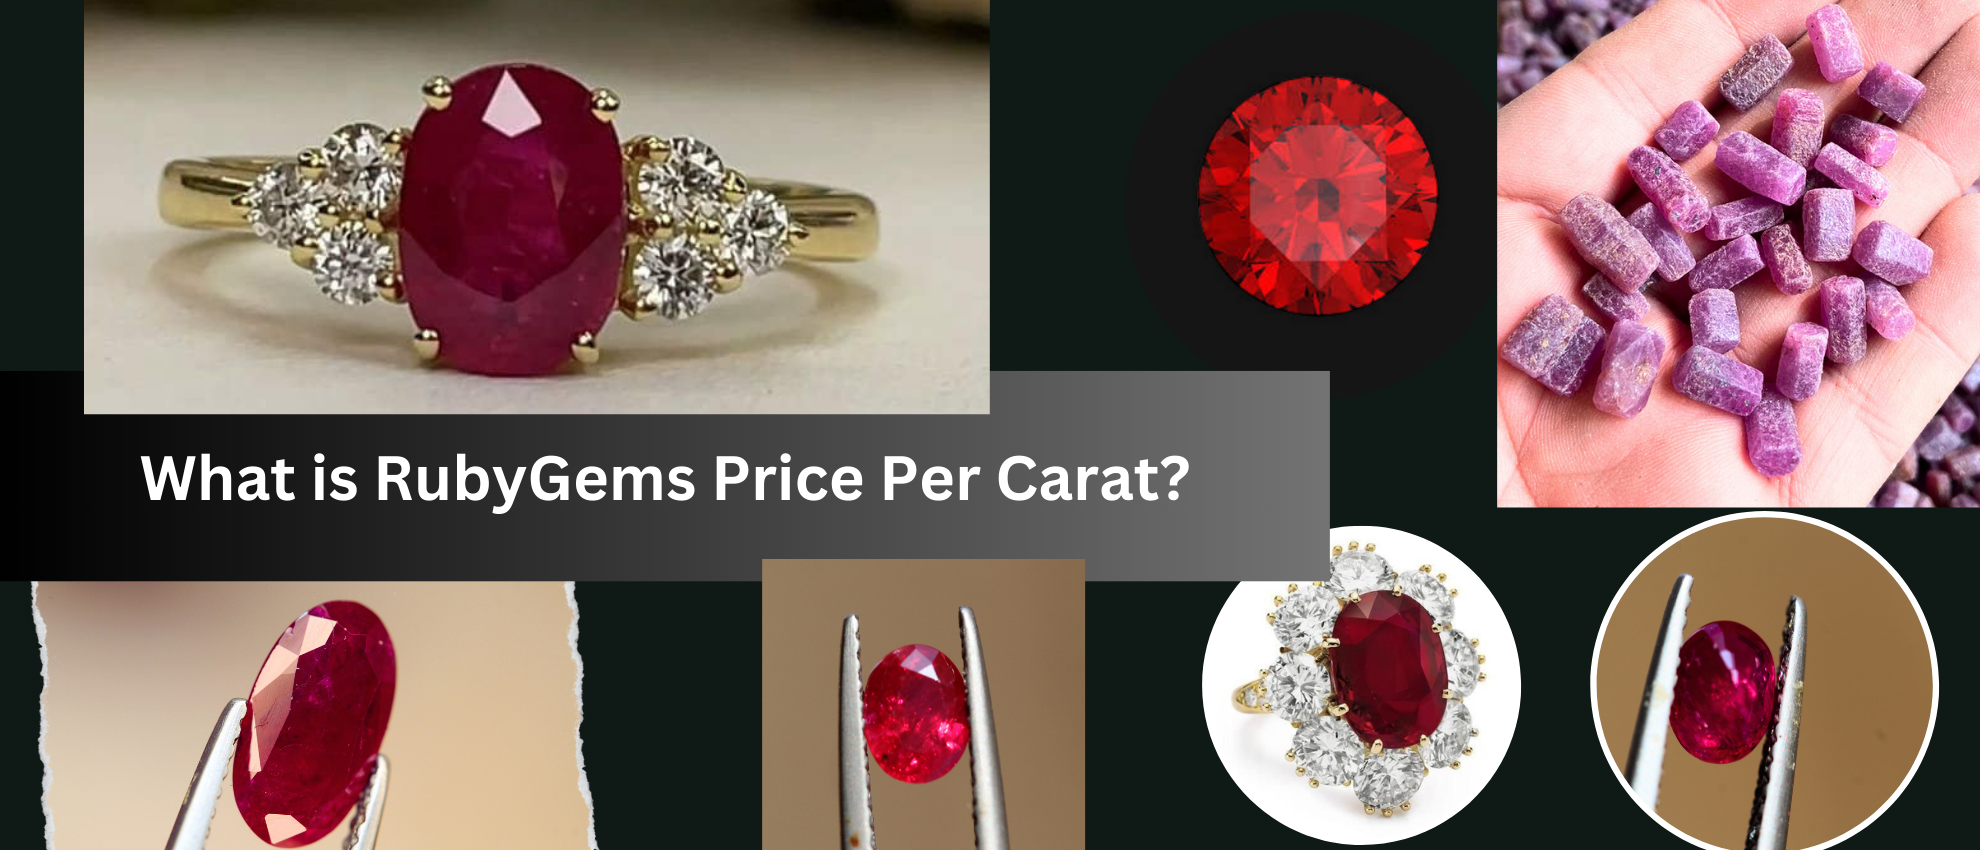 Is Ruby Very Expensive Stone? RubyGems Price Per Carat